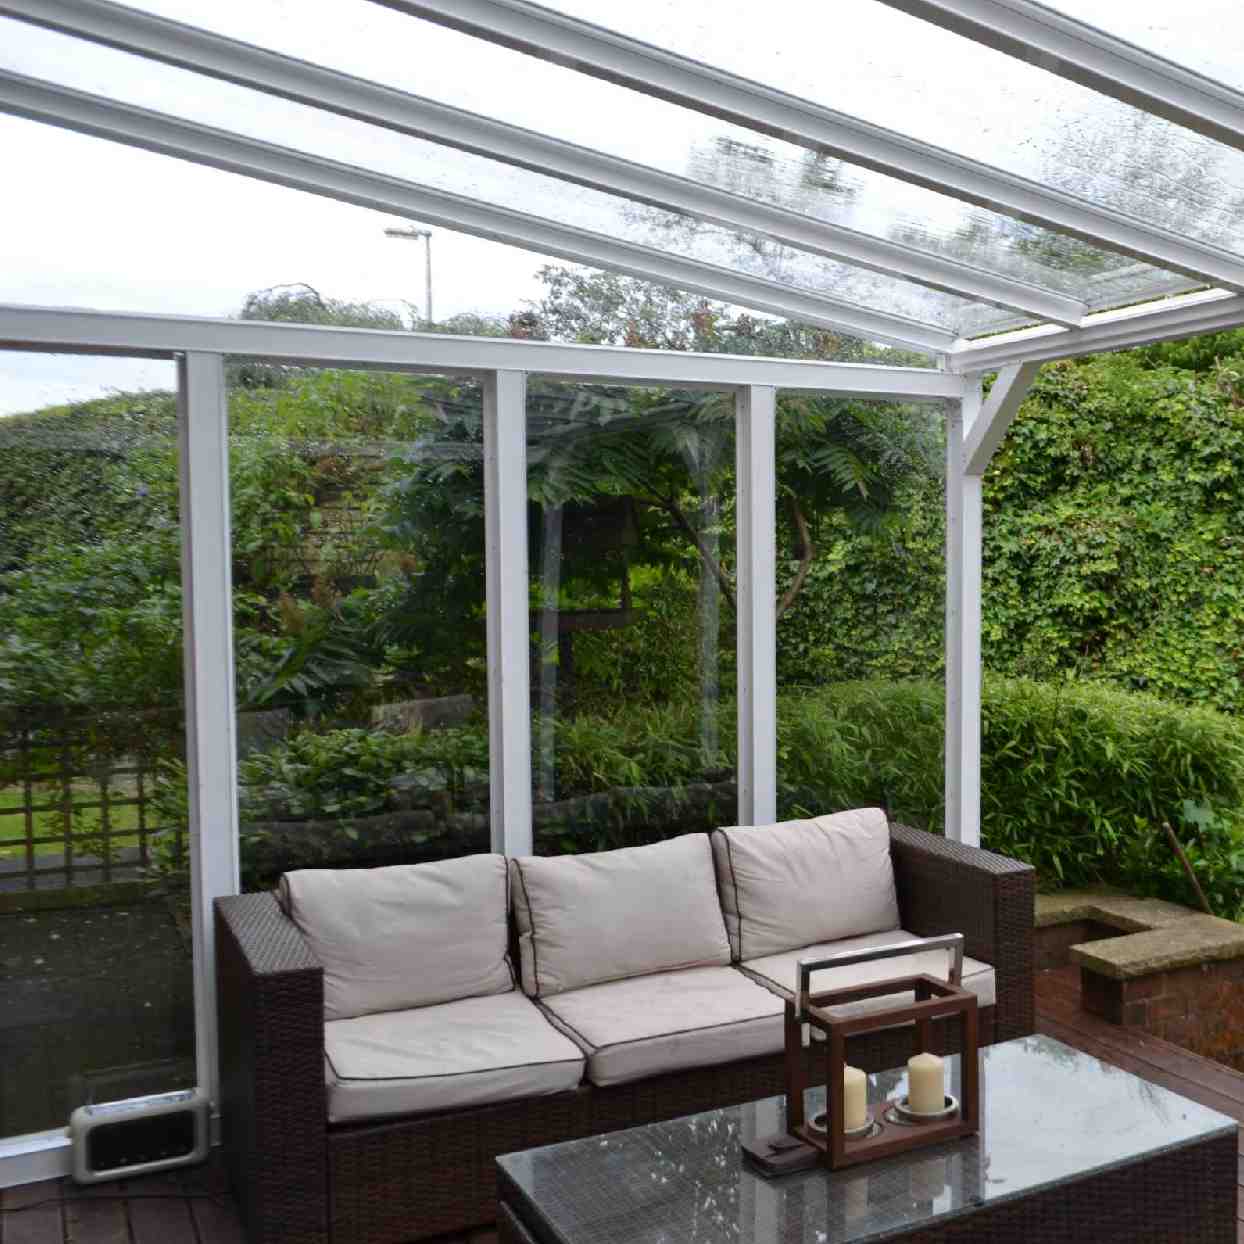 Buy Omega Verandah White with 16mm Polycarbonate Glazing - 6.3m (W) x 4.0m (P), (4) Supporting Posts online today